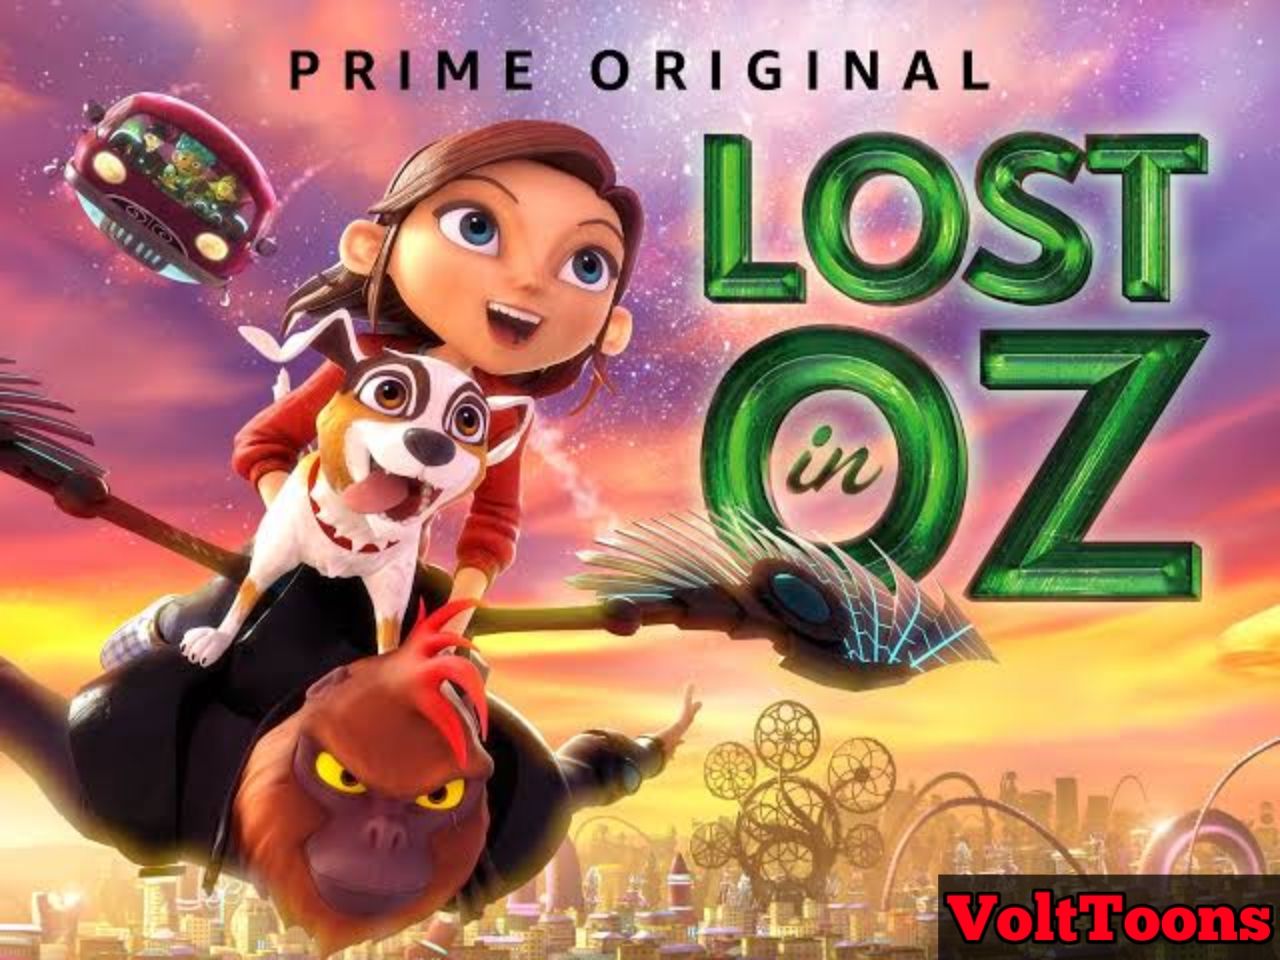 Lost in Oz [2015] Season 1 Hindi Dubbed Watch,Story, Review And More.